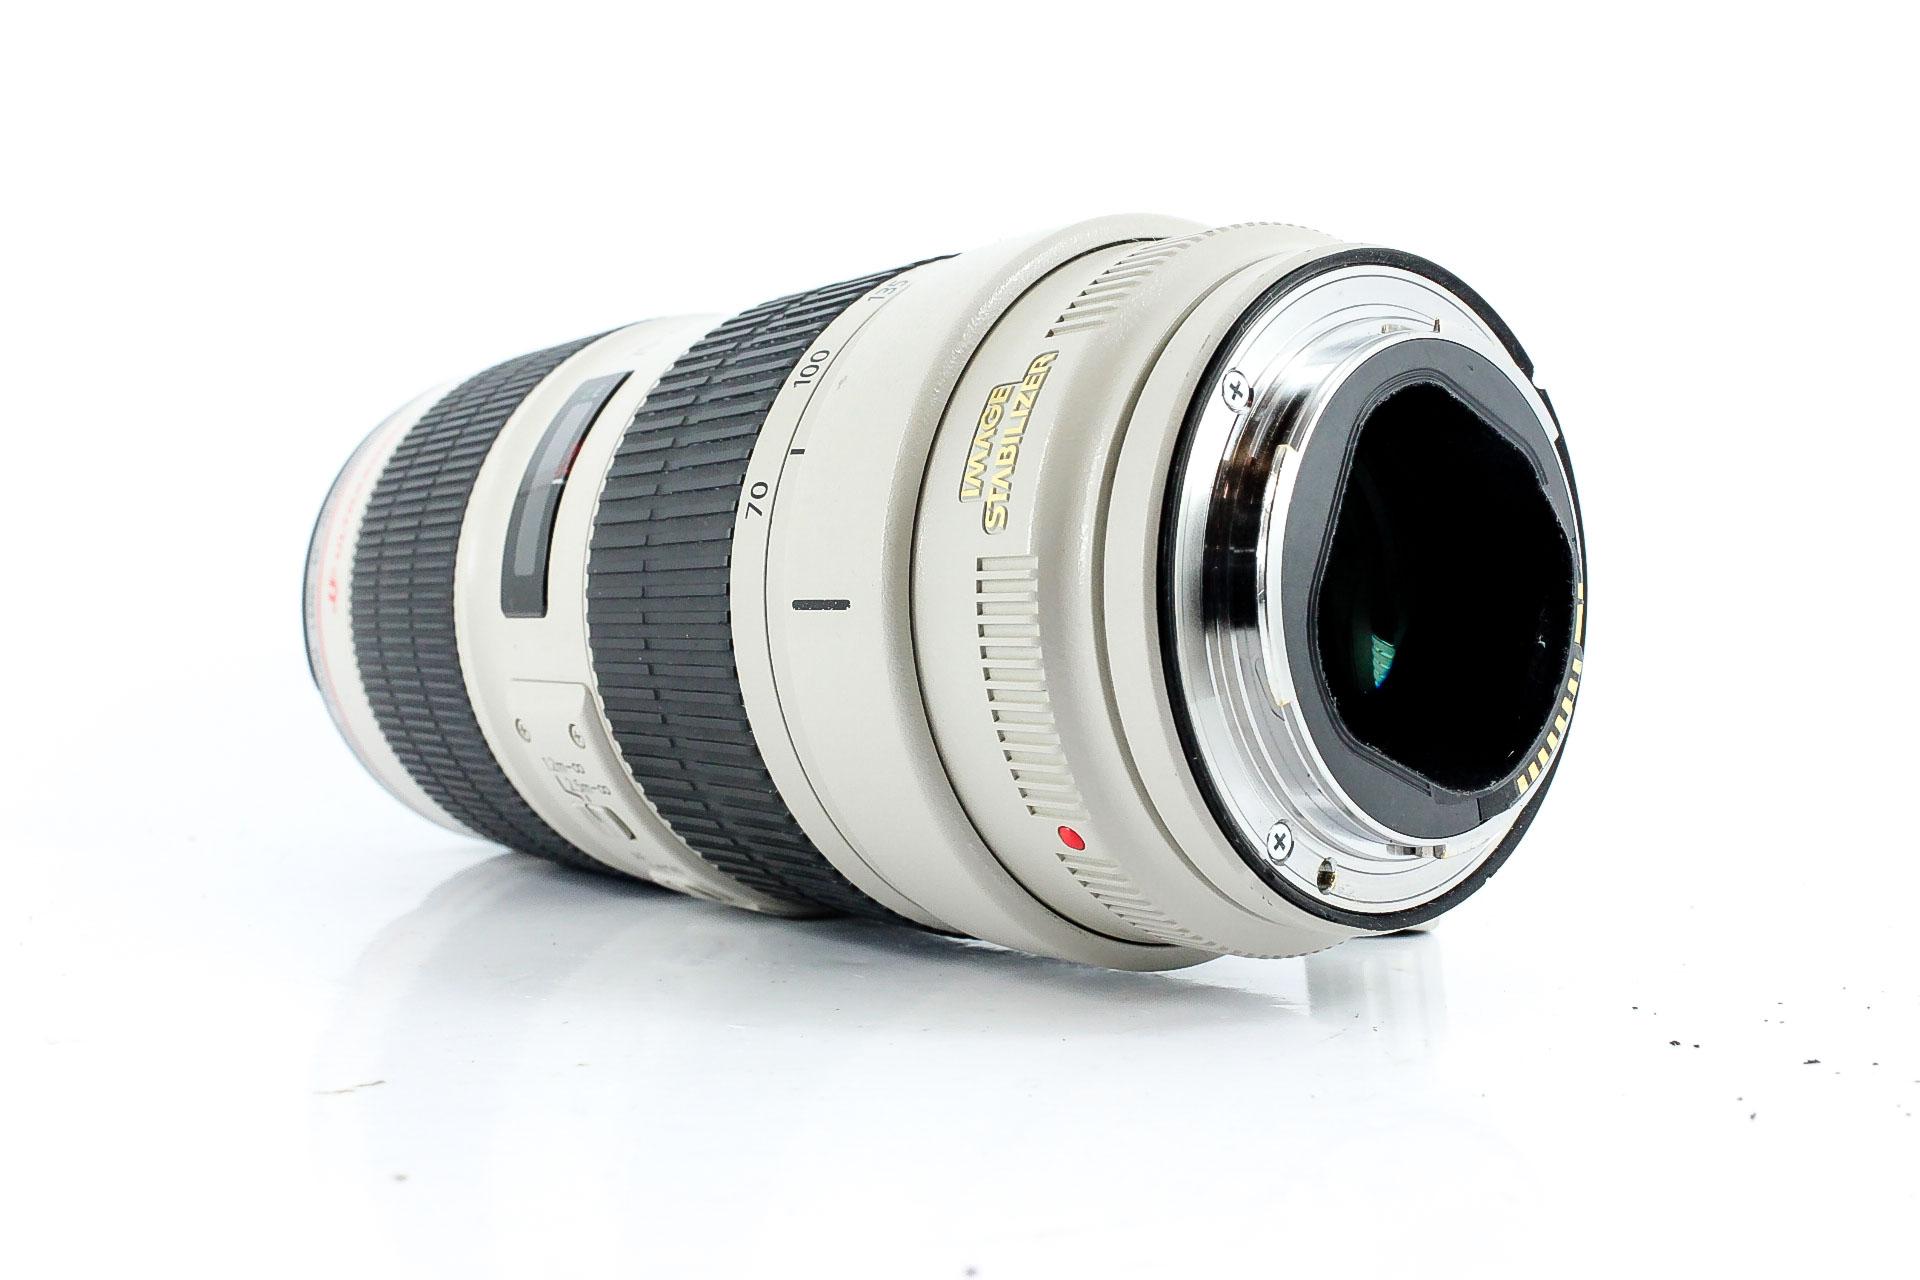 Canon EF 70-200mm f/2.8 L IS II USM Lens - Lenses and Cameras